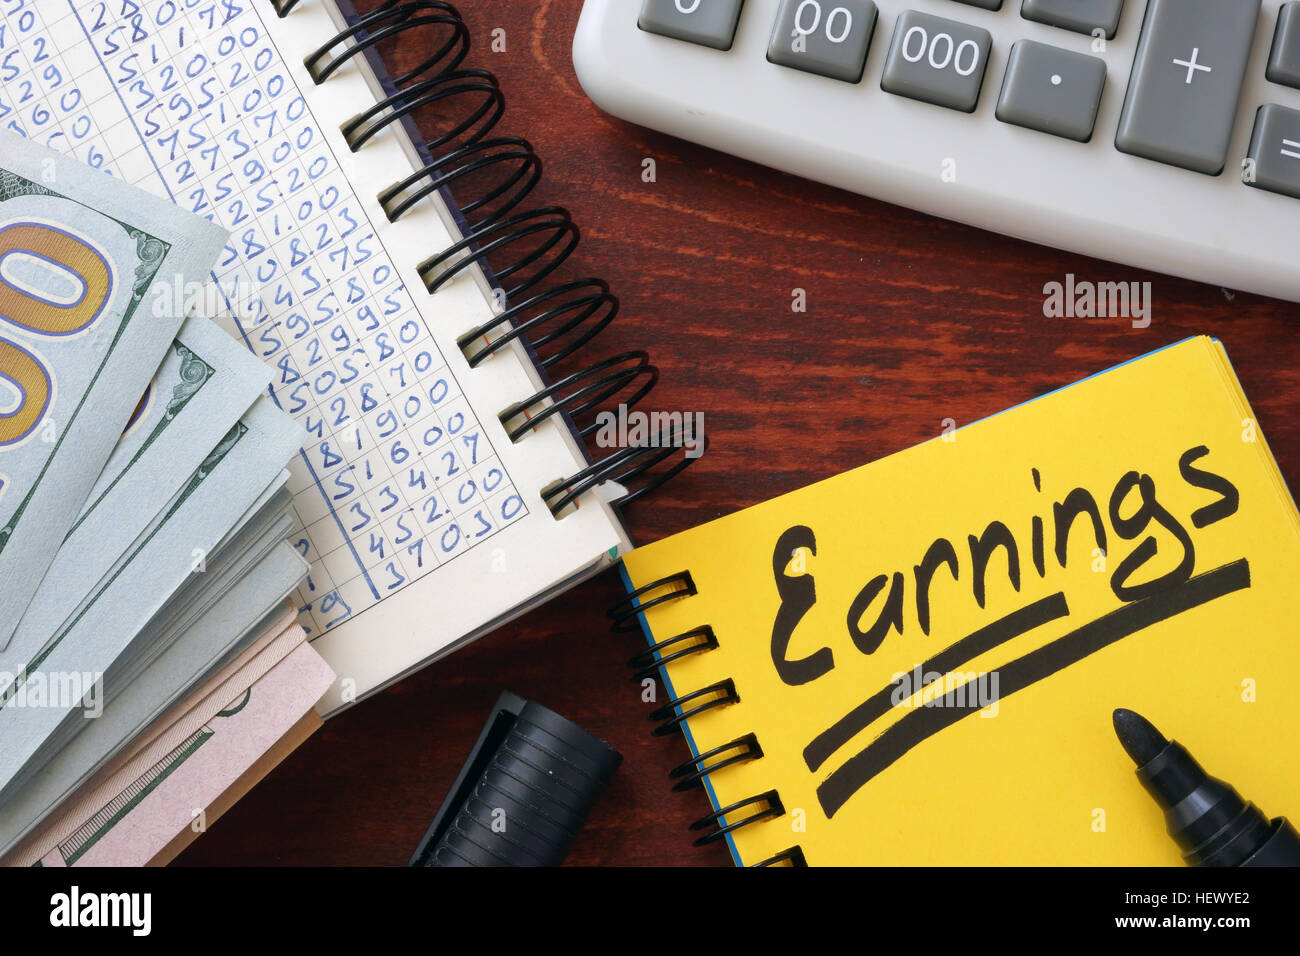 Earnings written in a note, calculator and cash. Stock Photo